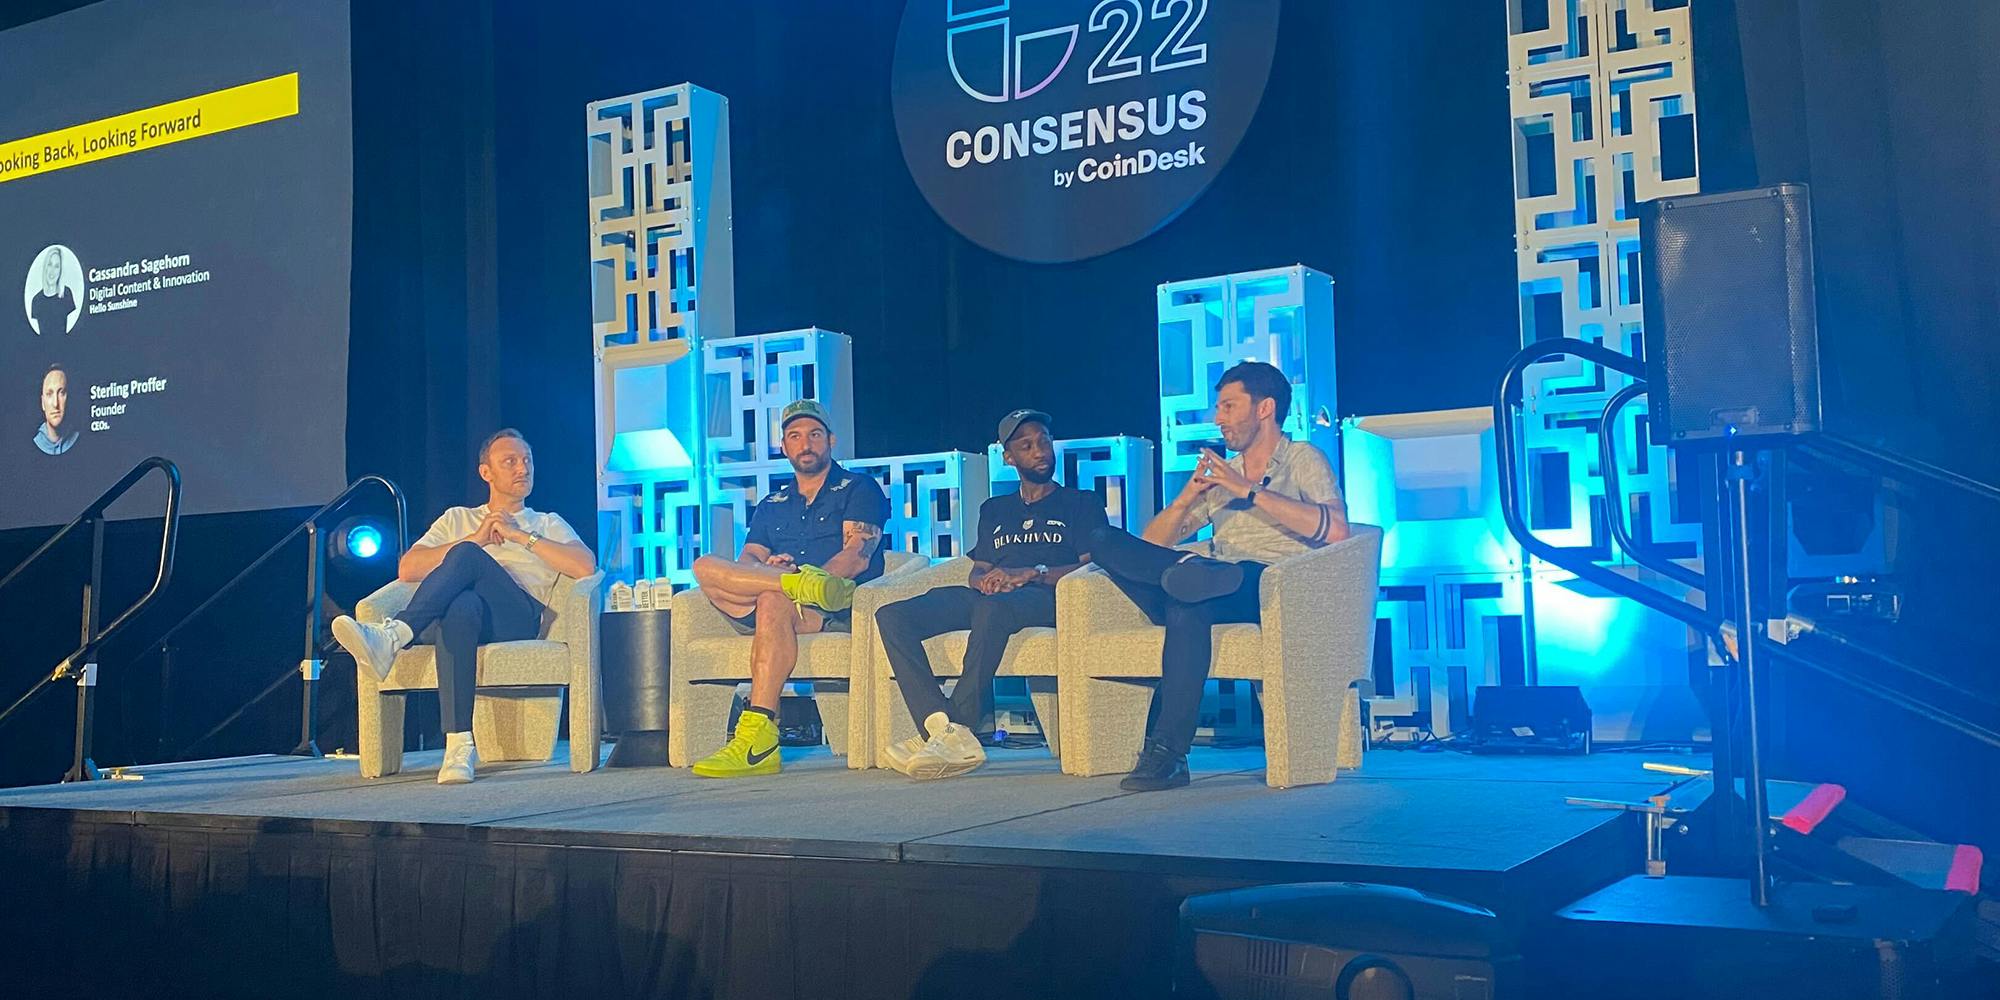 Amid crypto crashes, blockchain evangelists at the Consensus Creator Summit remain optimistic about creators’ opportunities in Web3